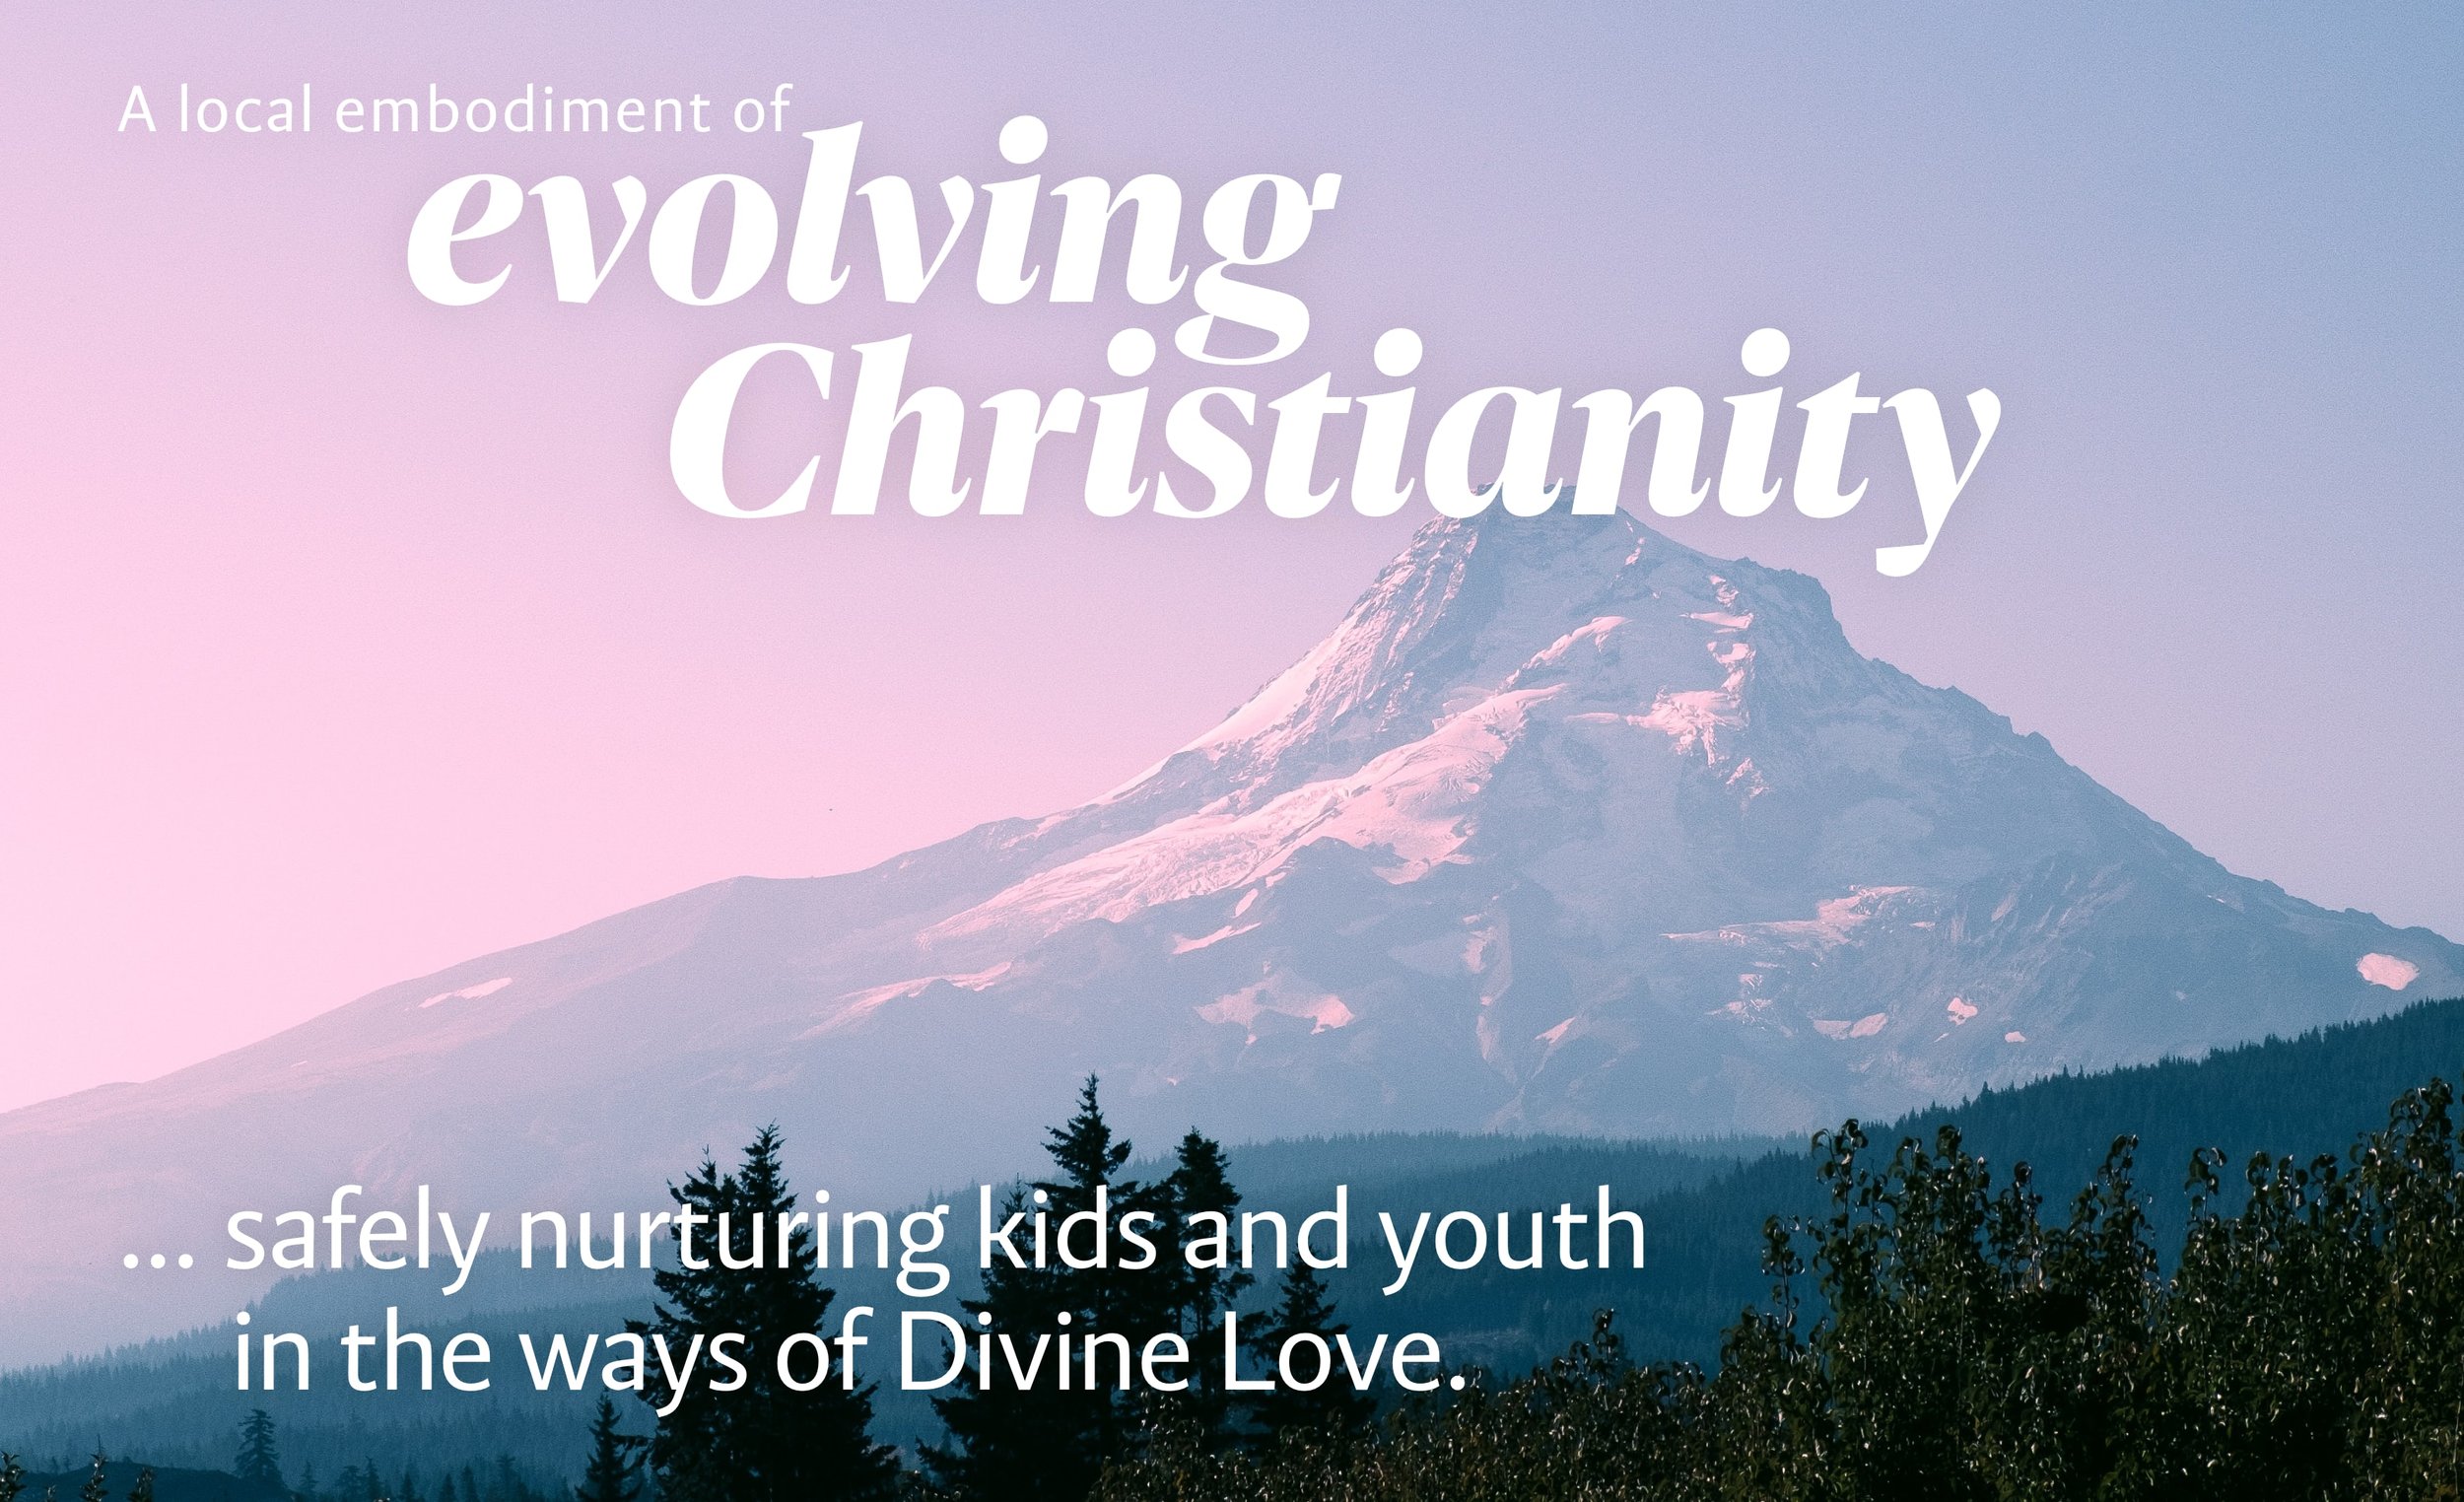  Safely nurturing kids and youth in the ways of Divine Love 